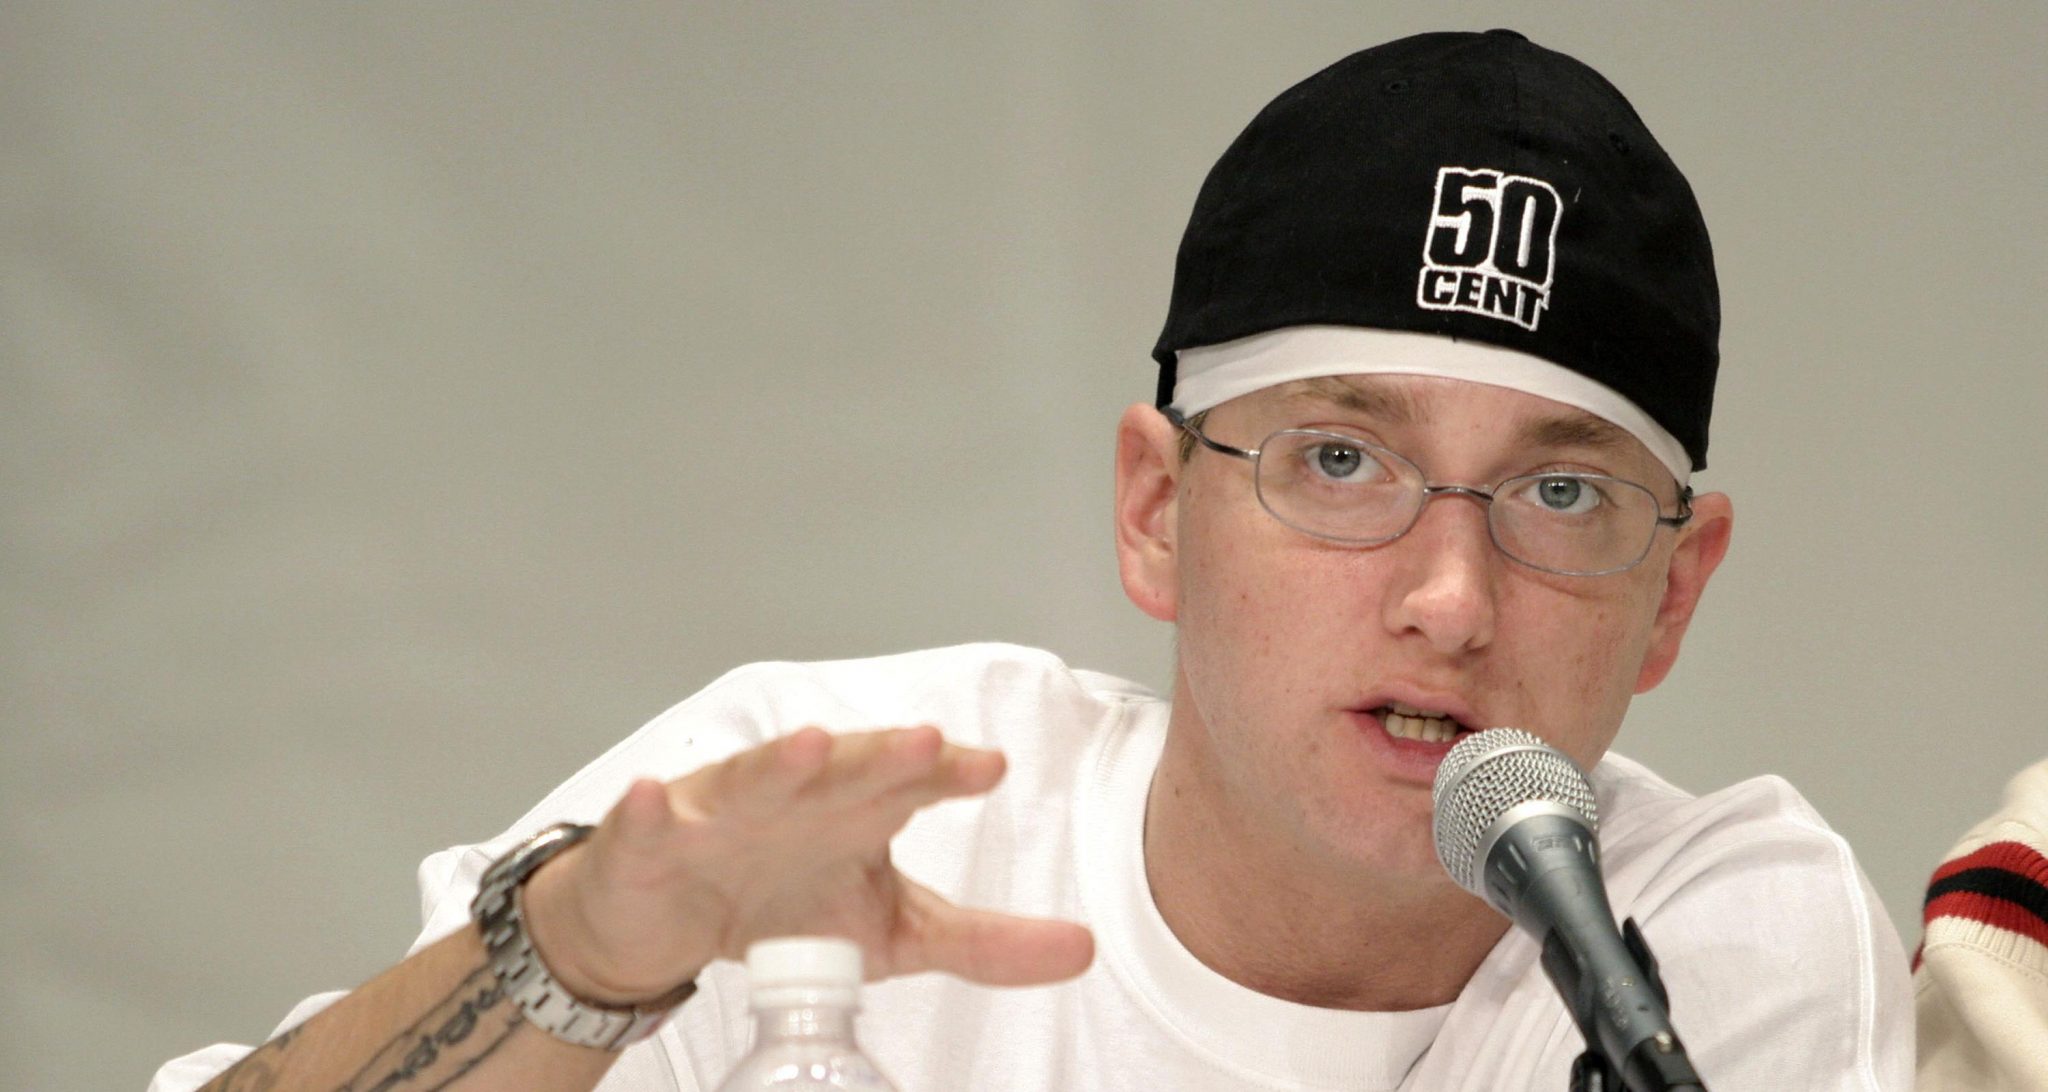 Rap artist Eminem speaks about his financial past and present at the 1st Financial Hip Hop Summit